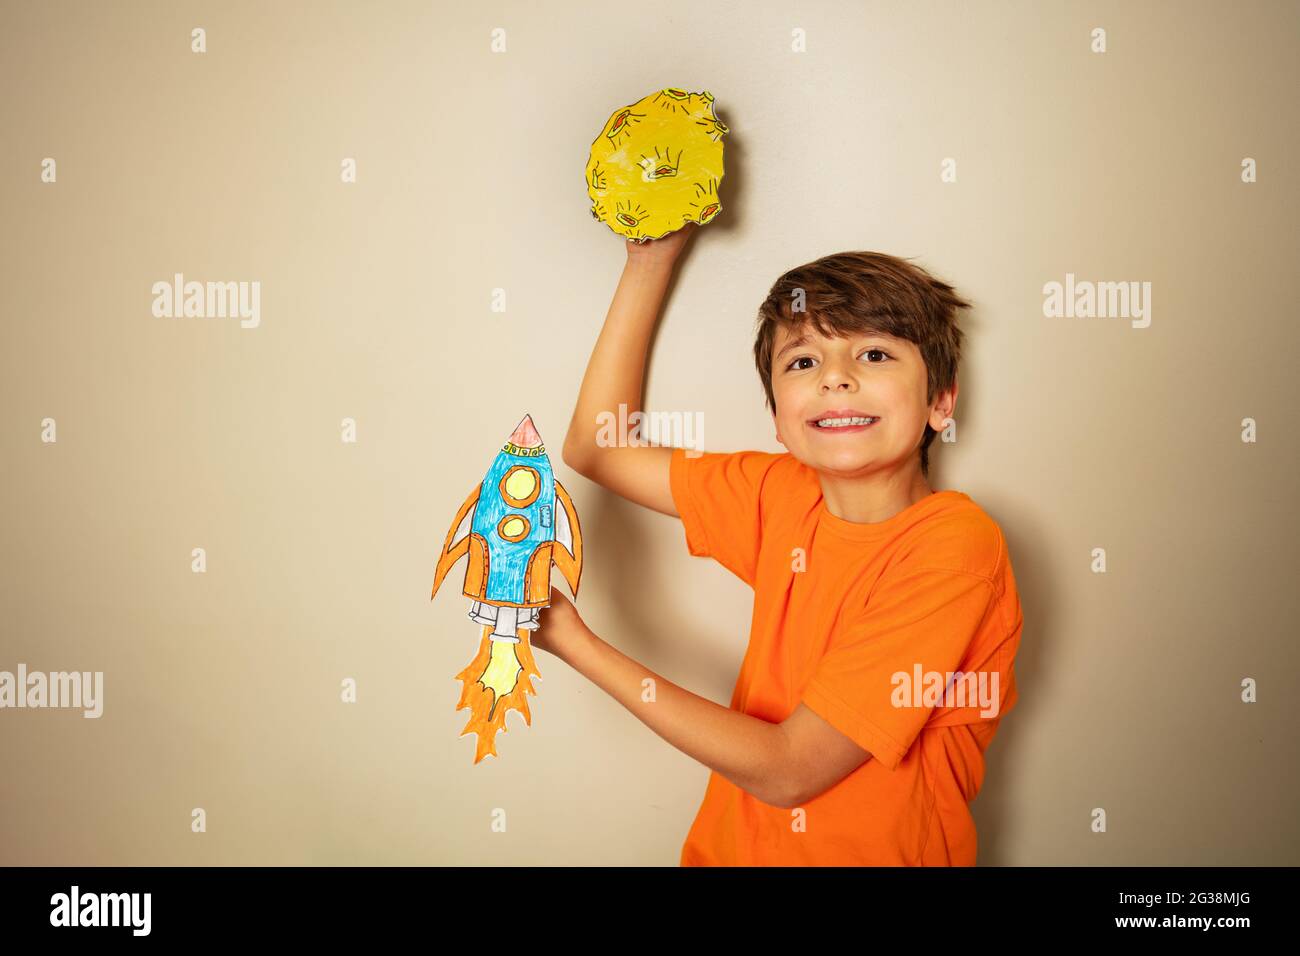 Smiling boy with rocket and planet made of paper Stock Photo